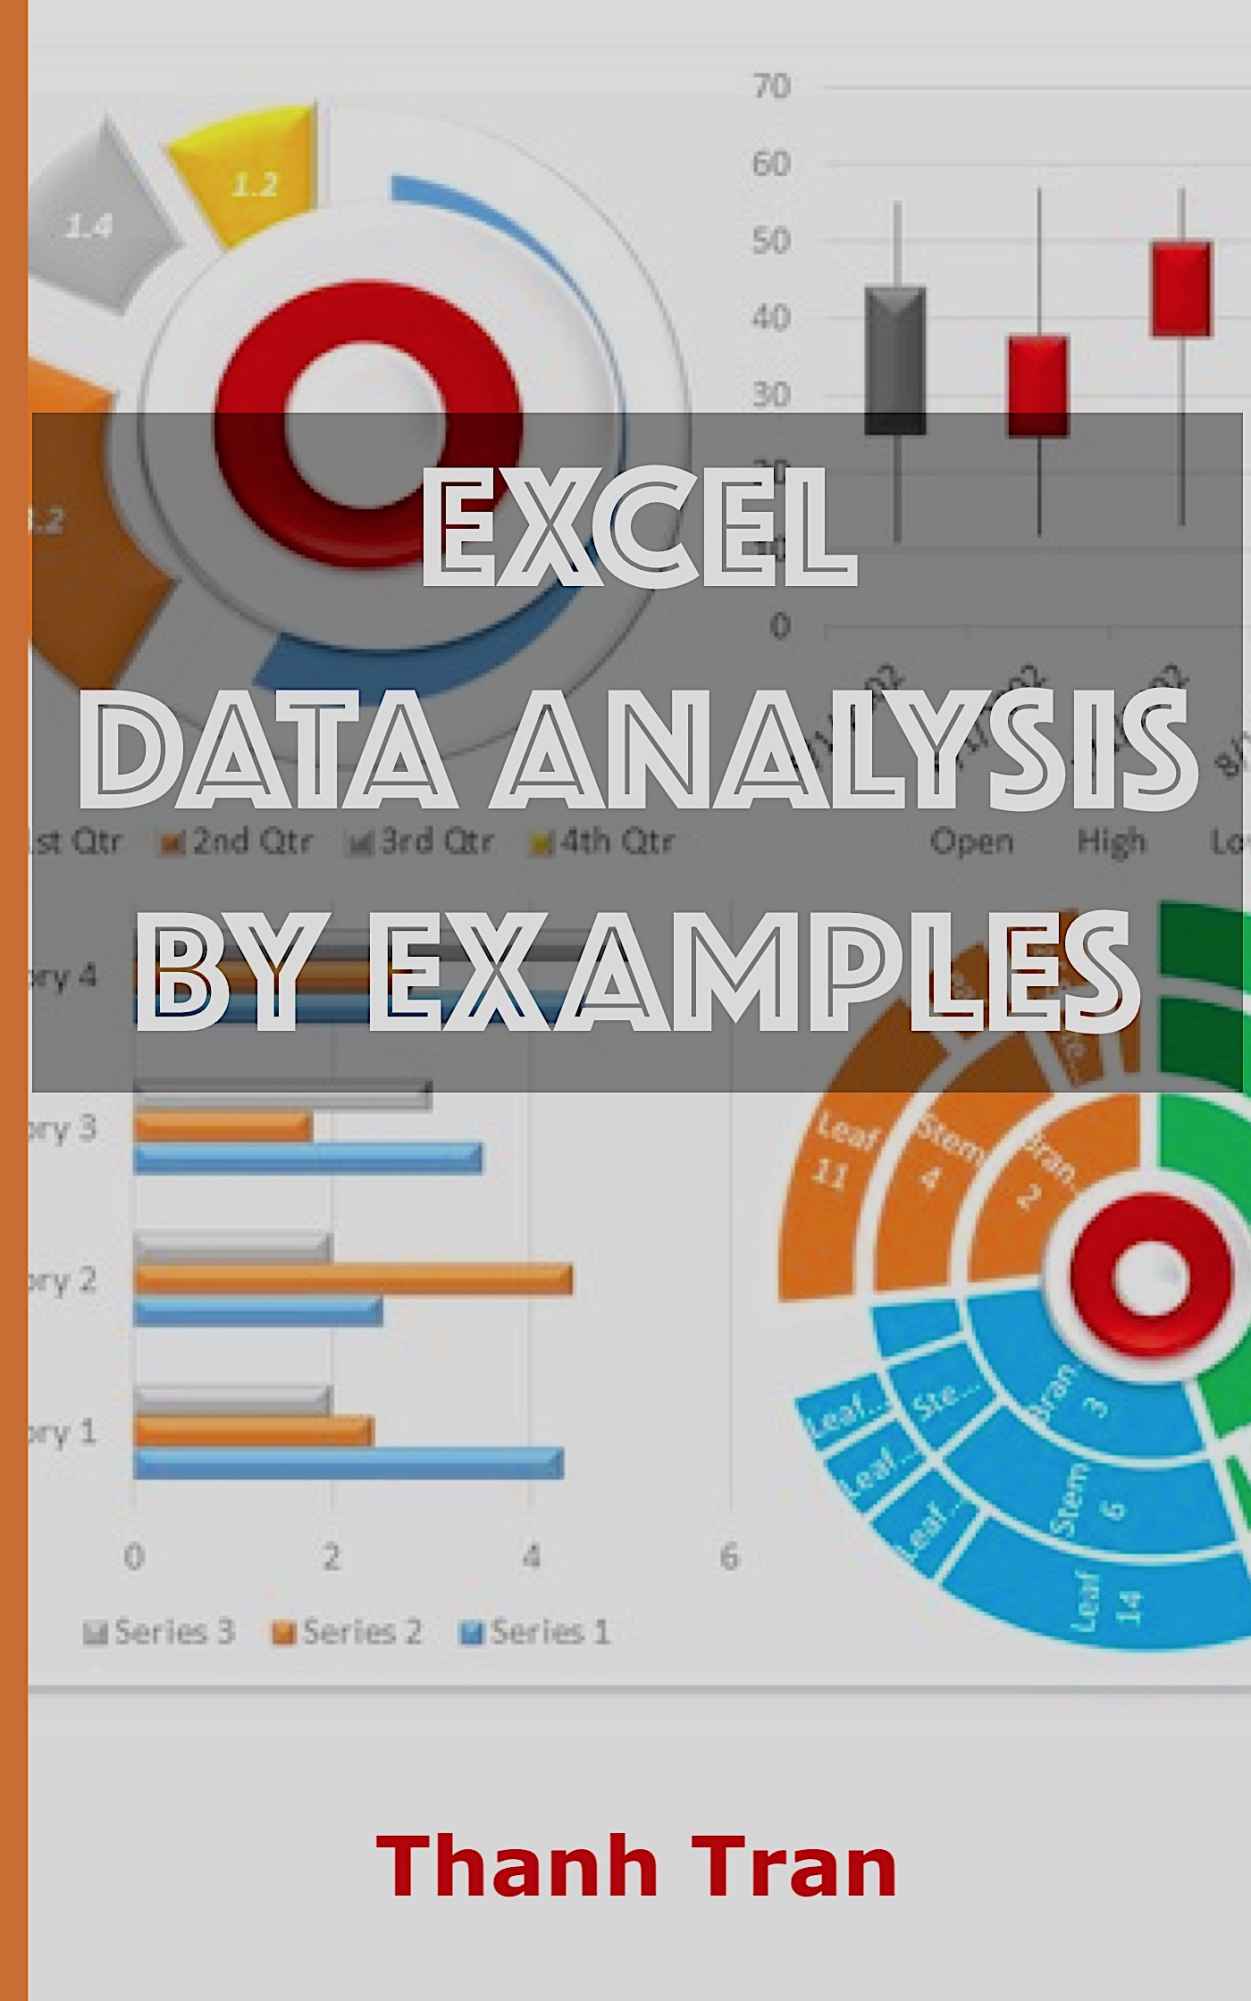 Excel data analysis by examples: Excel data analysis for complete beginners, Step-By-Step Illustrated Guide to Mastering Excel data analysis (Excel advance Book 1)